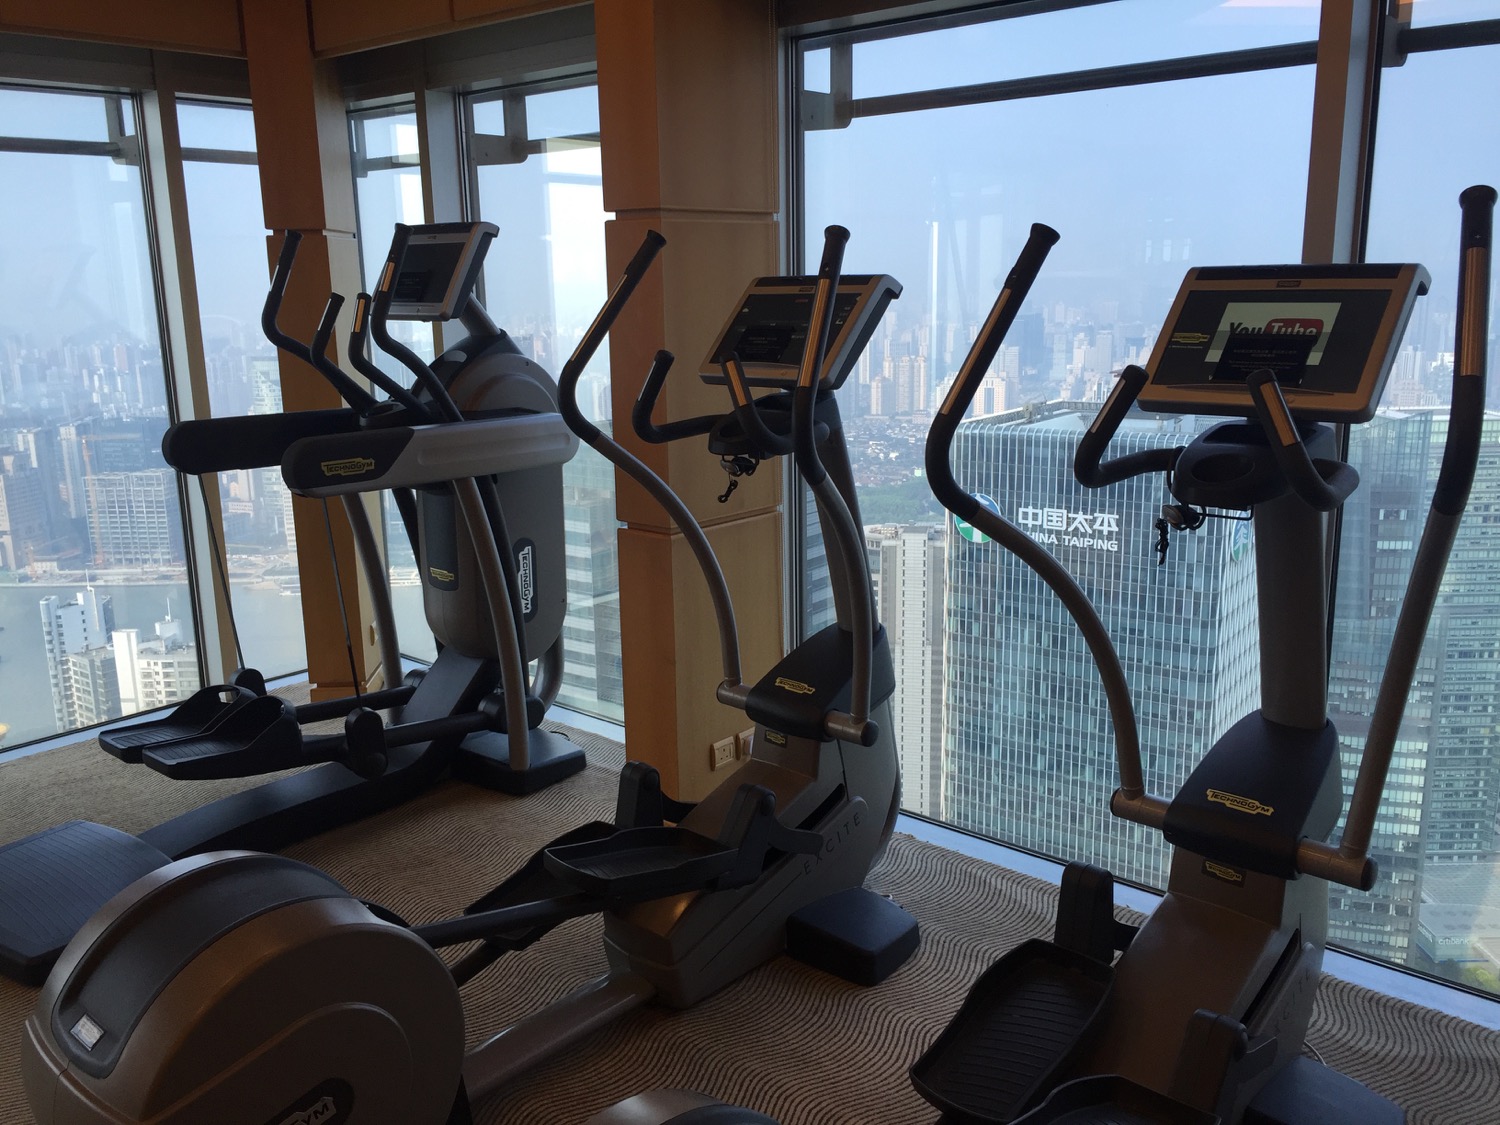 a group of exercise machines in a room with windows